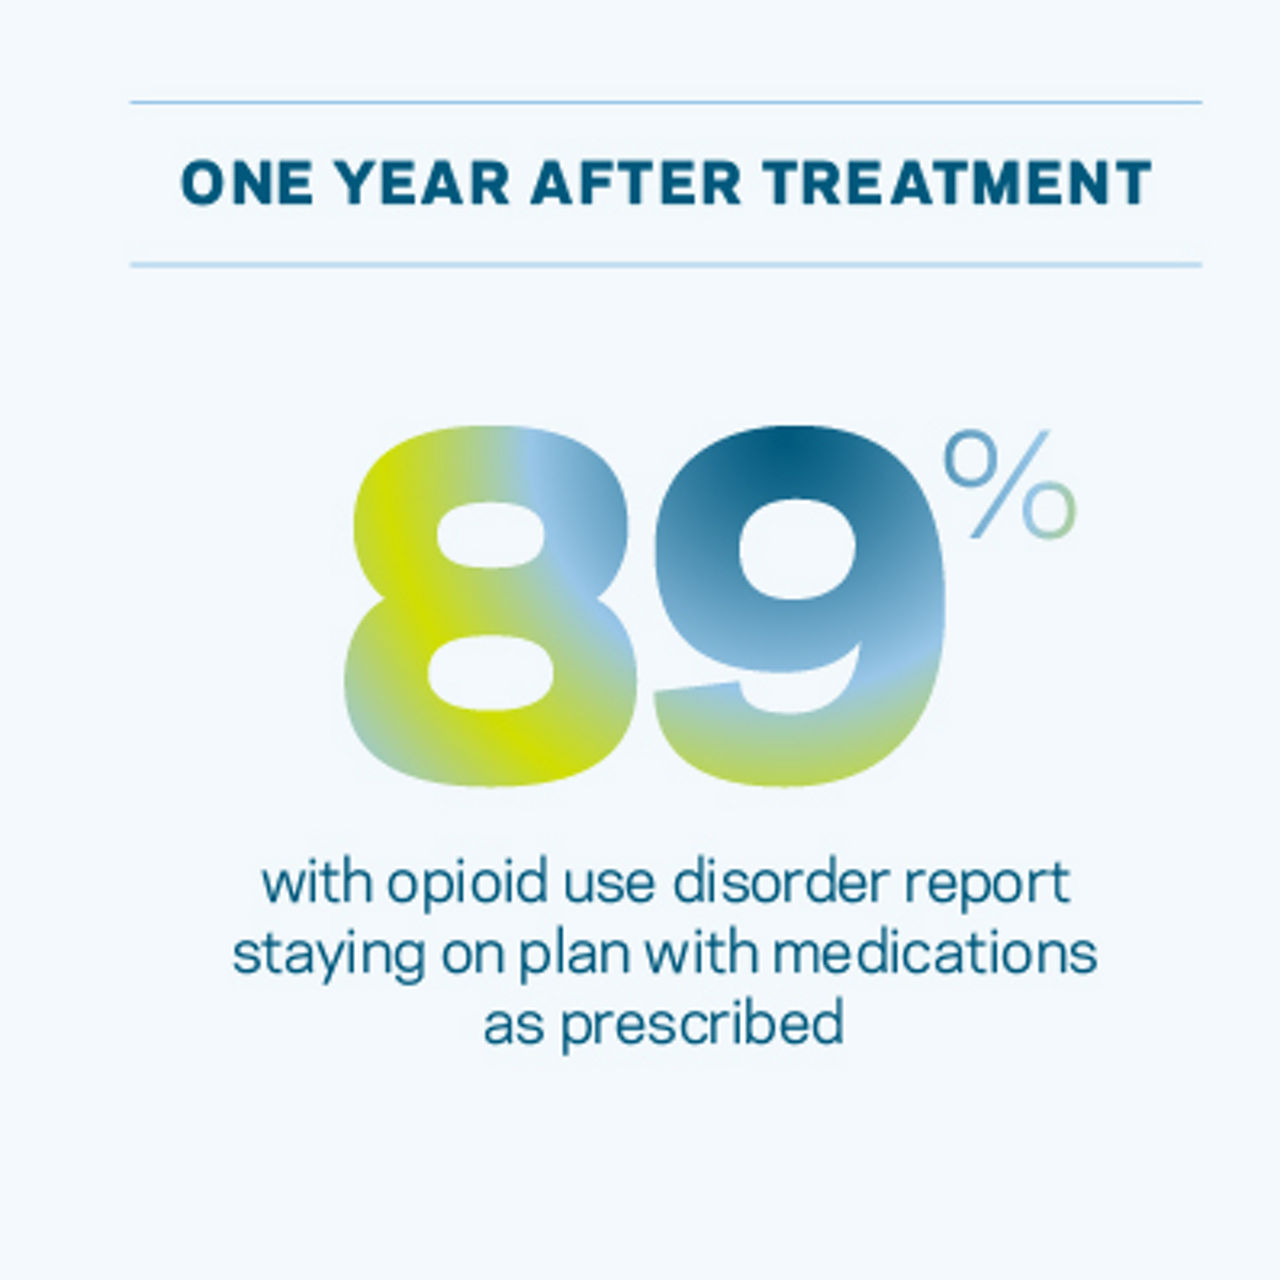 One year after treatment, 89 percent with opioid use disorder report staying on plan with medications as prescribed